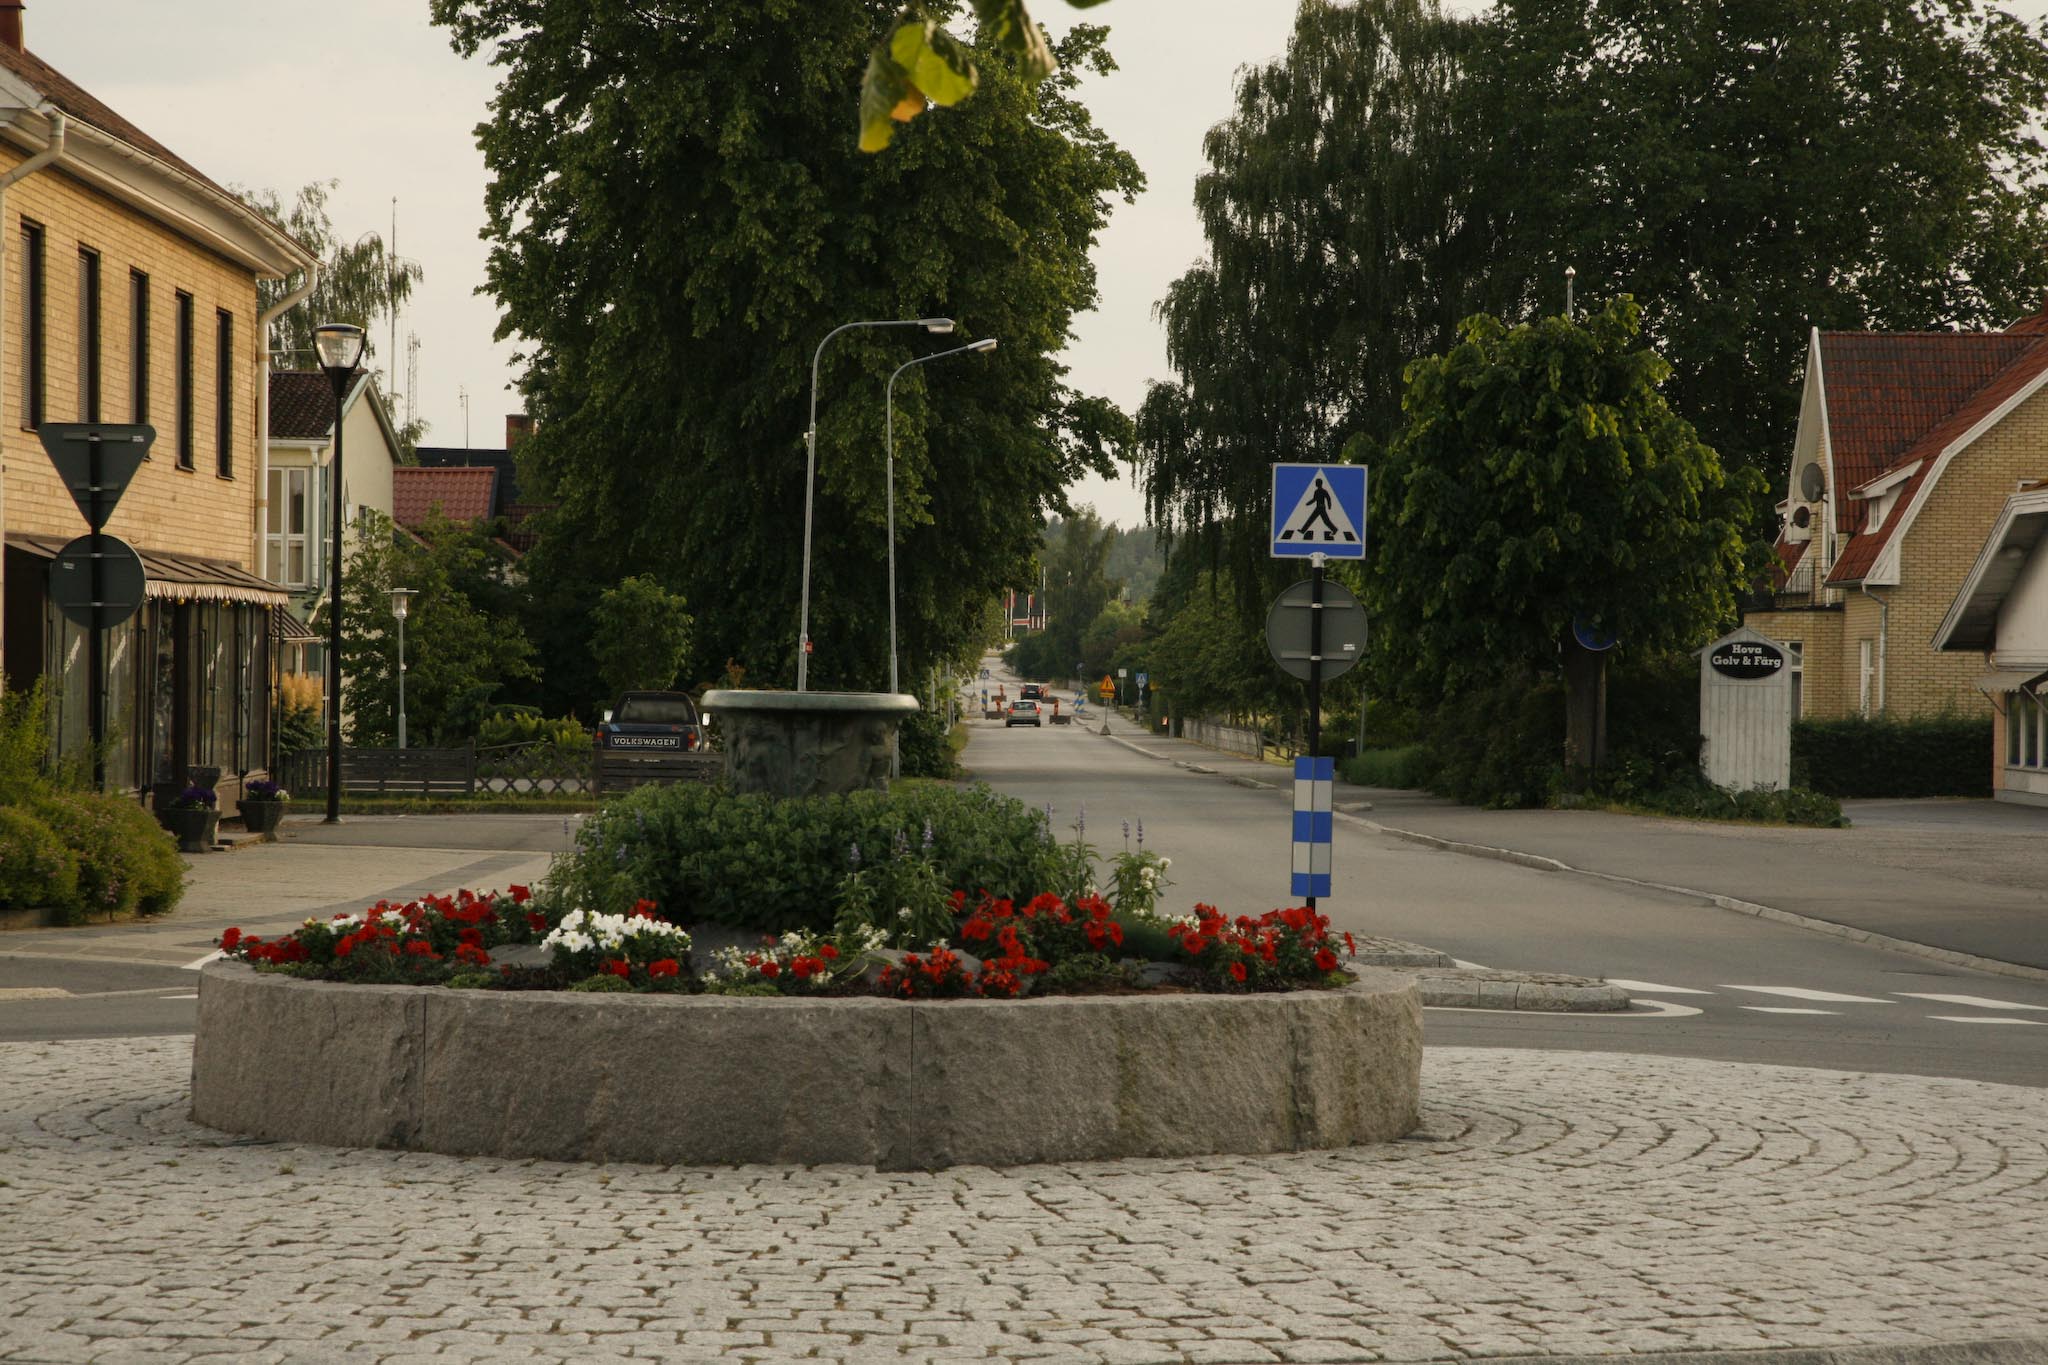 a sign and flowers in the middle of a street